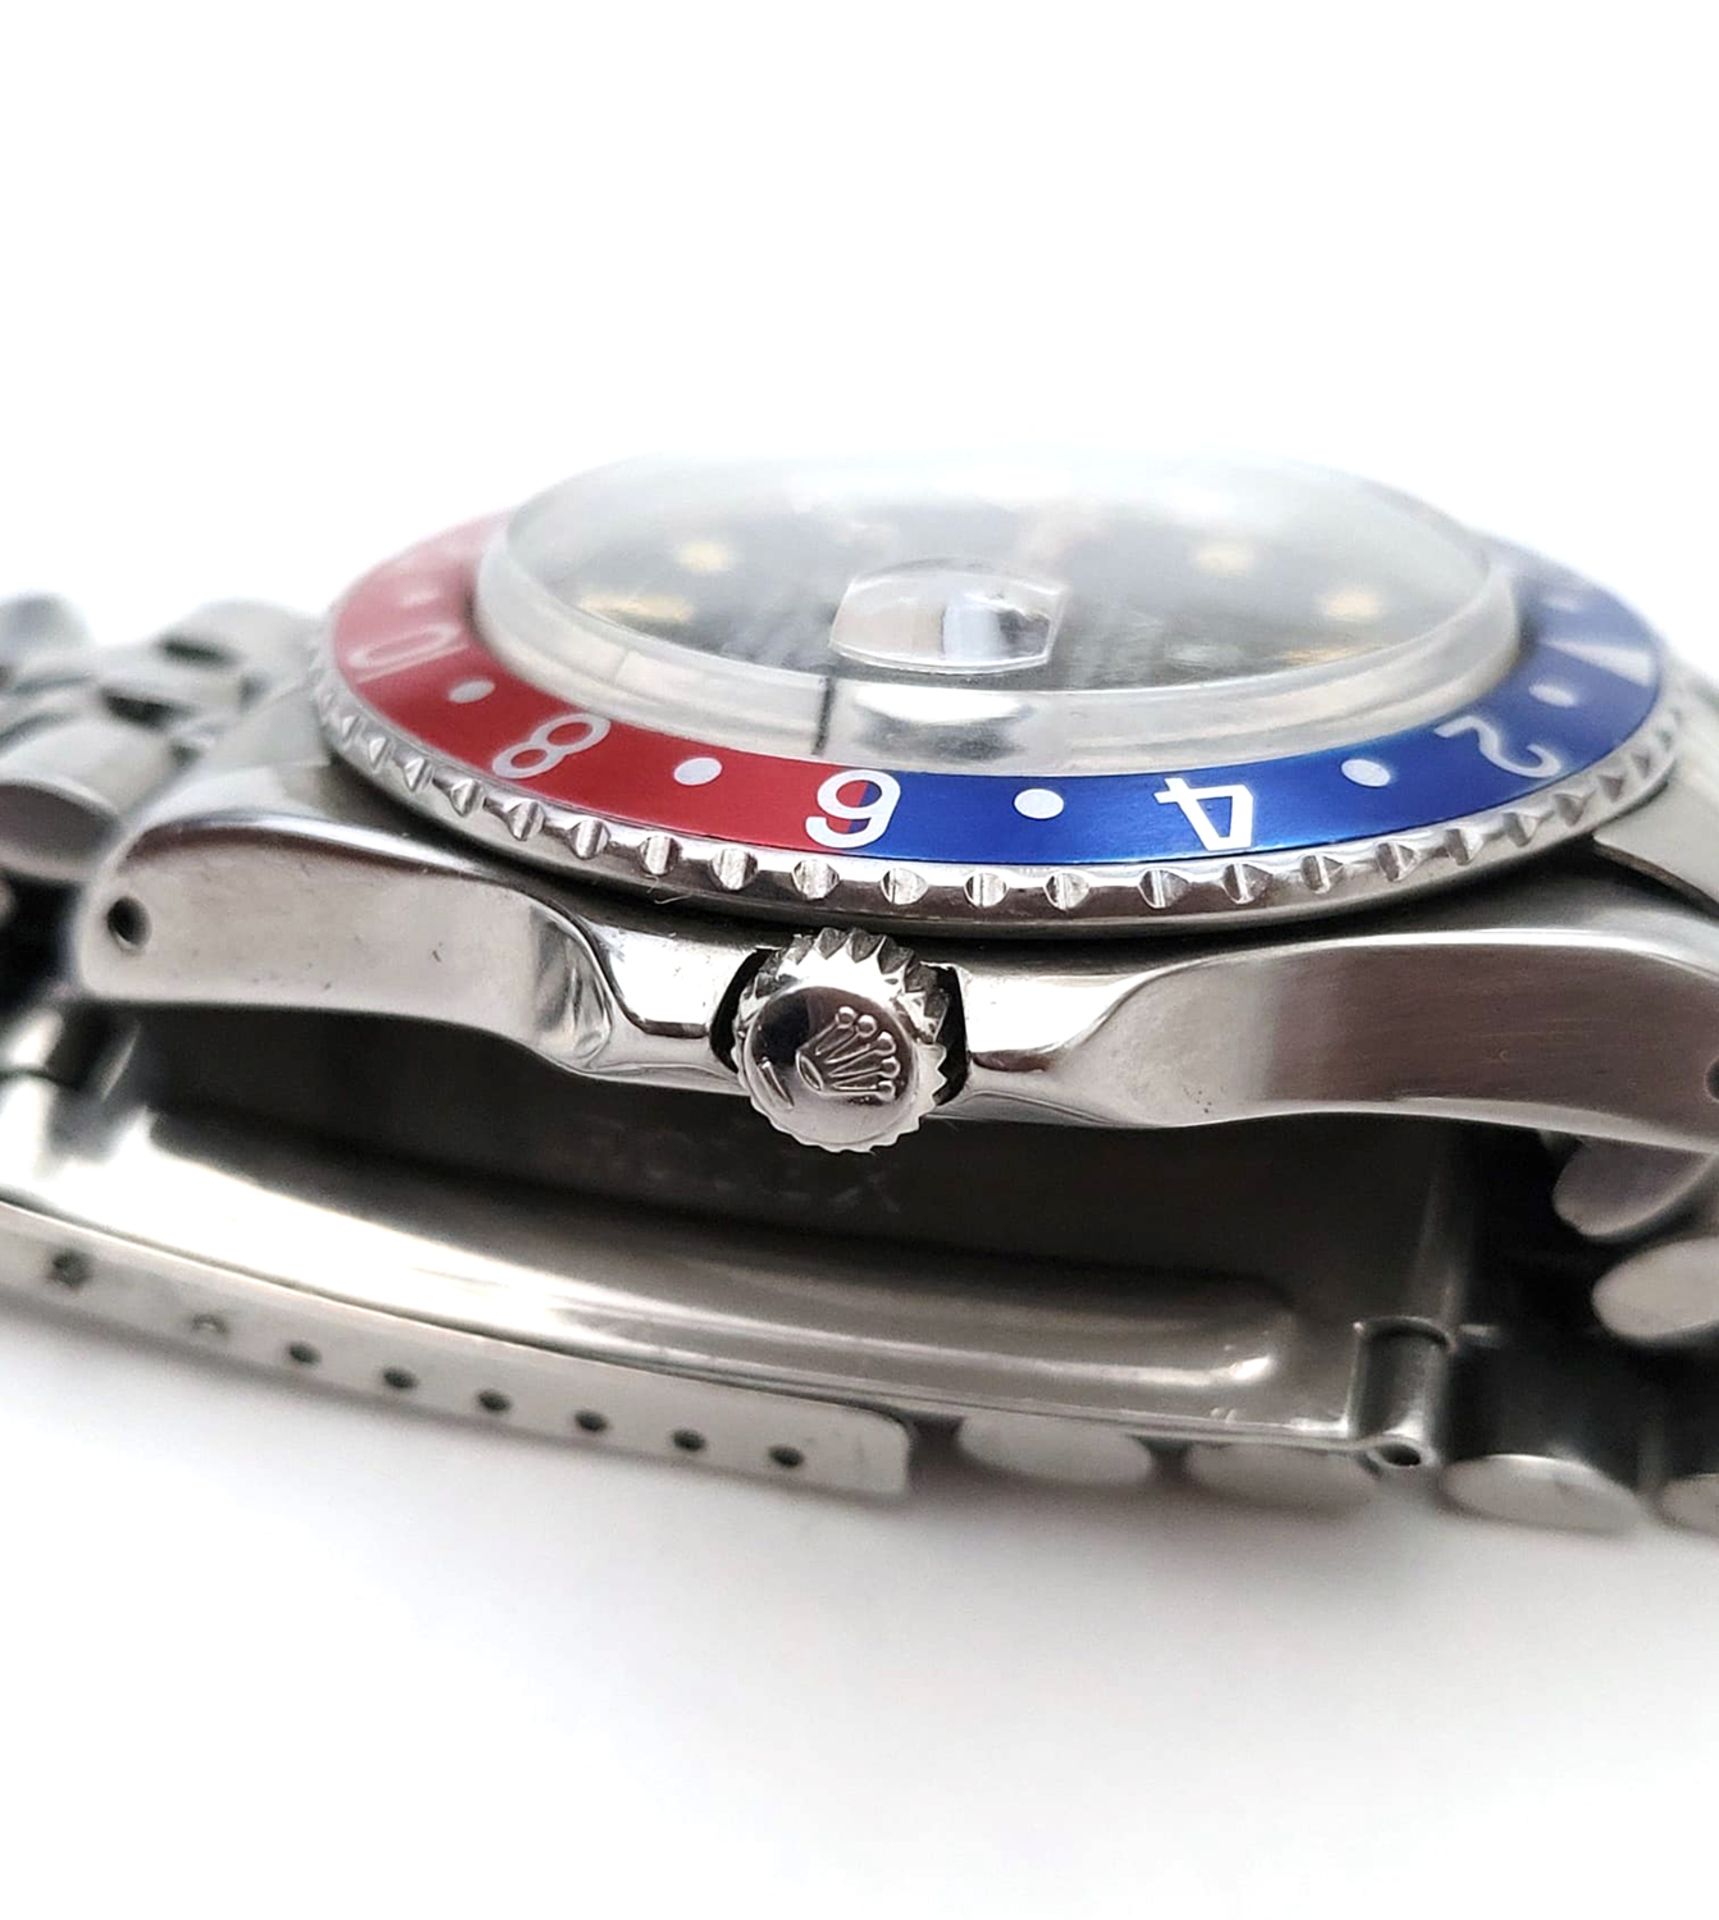 Exceptional Vintage Rolex GMT Mark II with "Pepsi" bezel and Jubilee bracelet, year 1964, in steel - Image 4 of 11